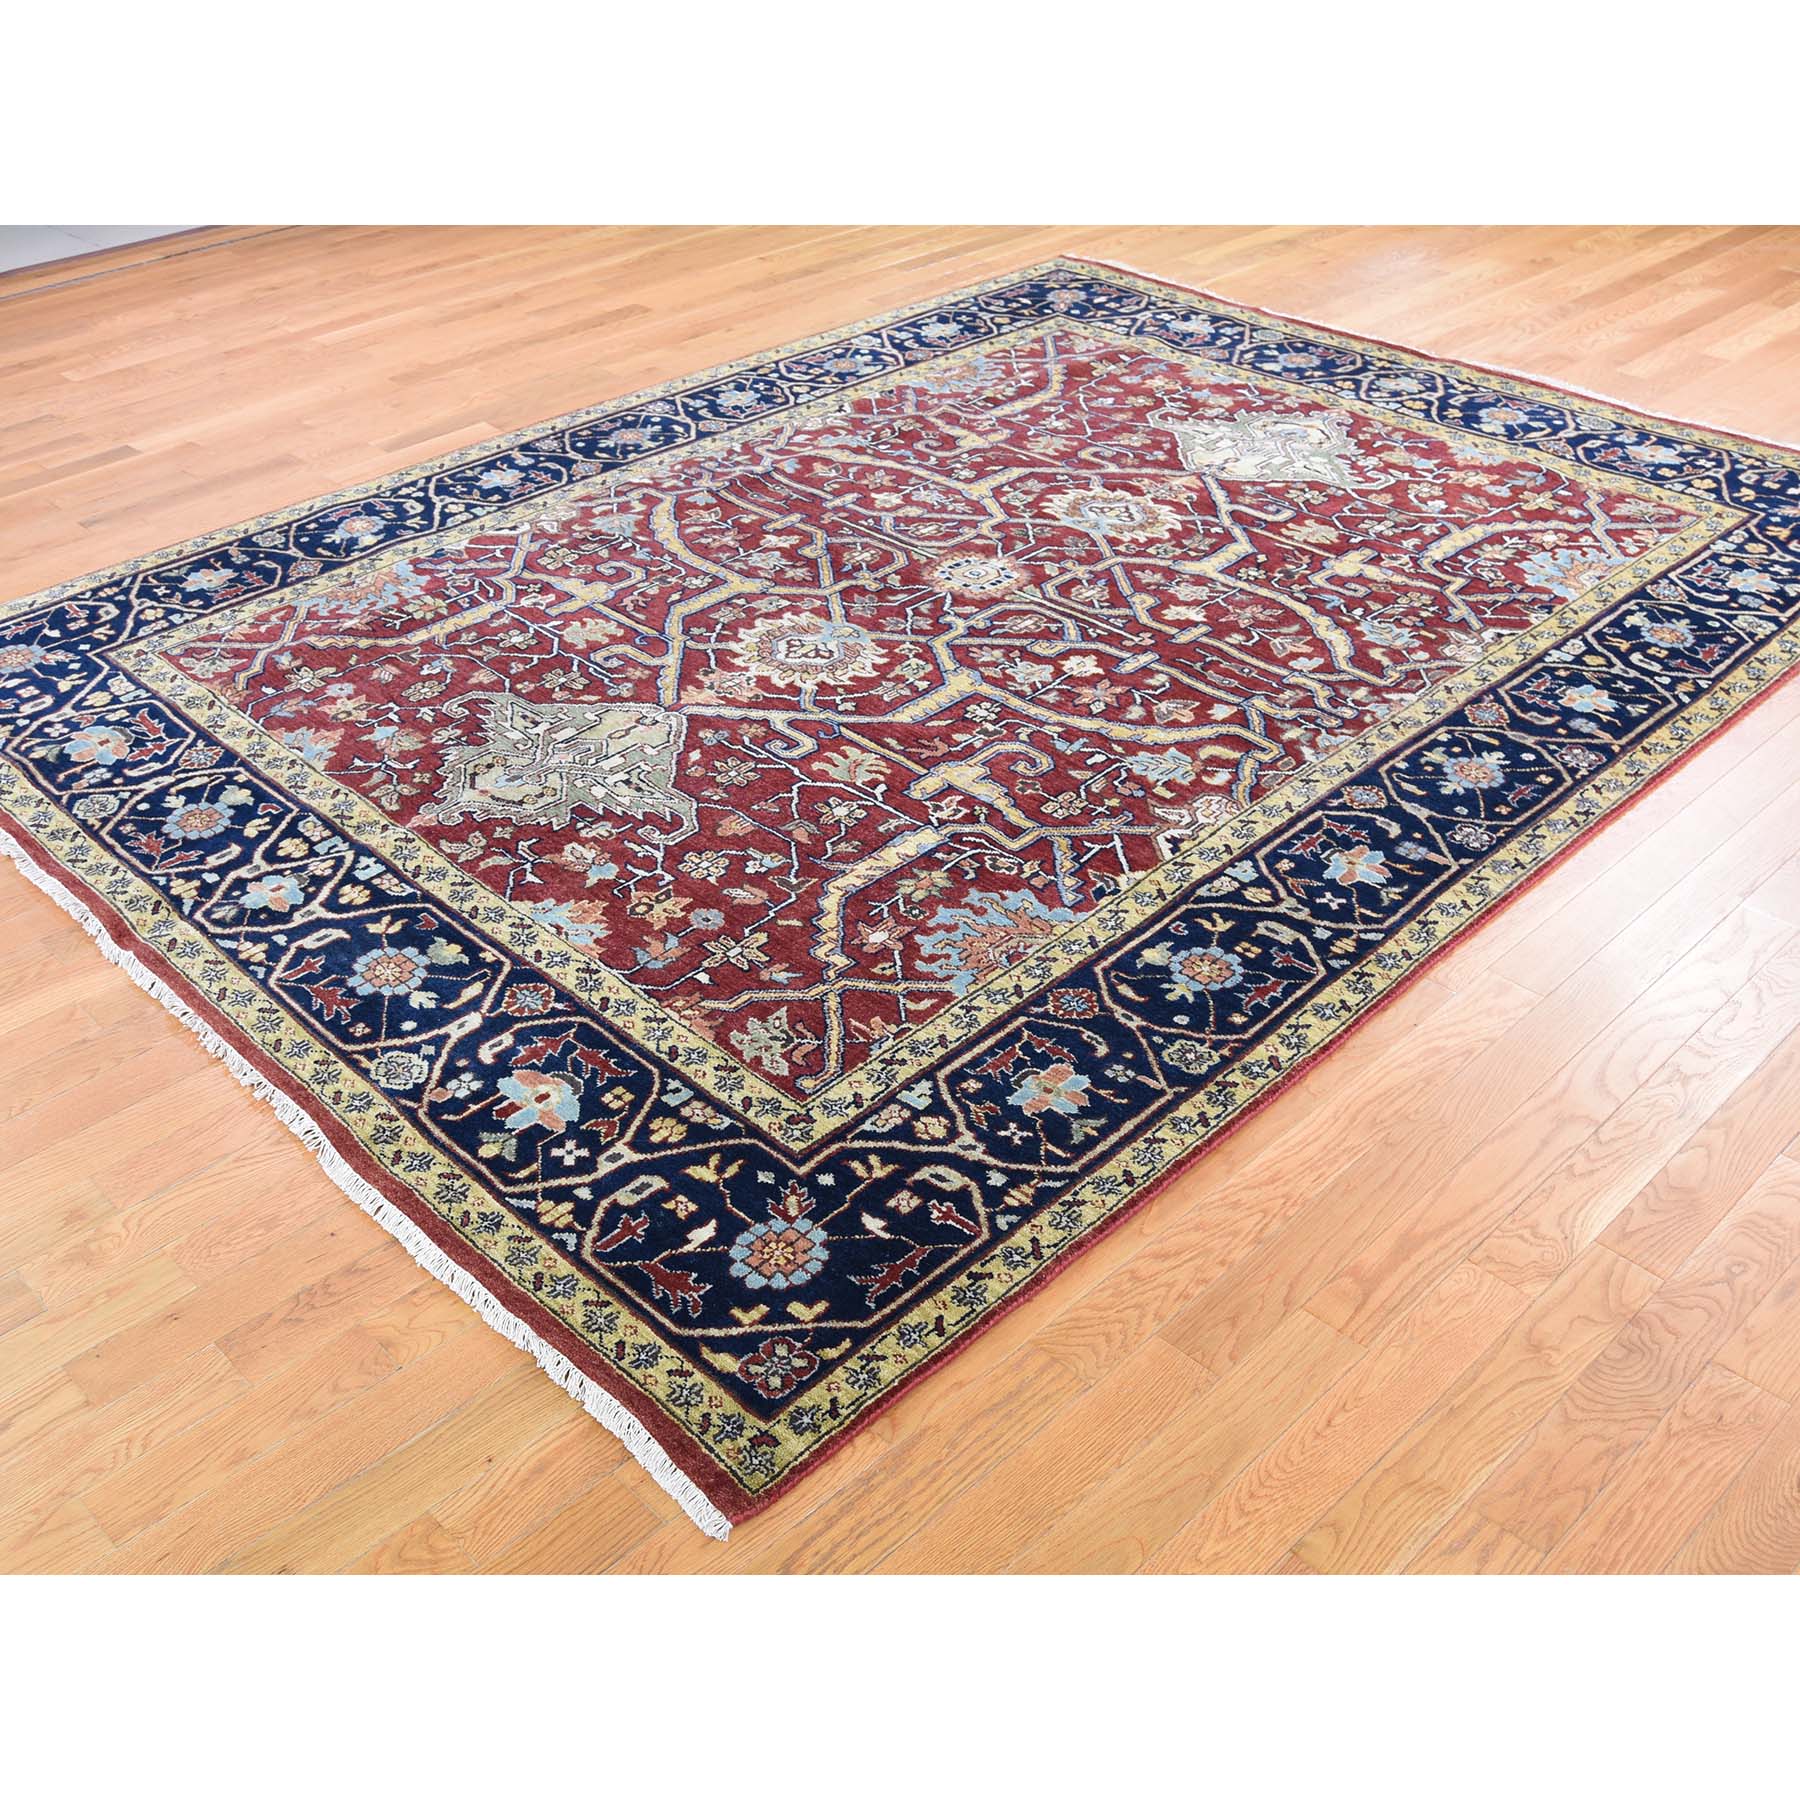 8-x10-3  Red Heriz Revival Pure Wool Hand-Knotted Oriental Rug 